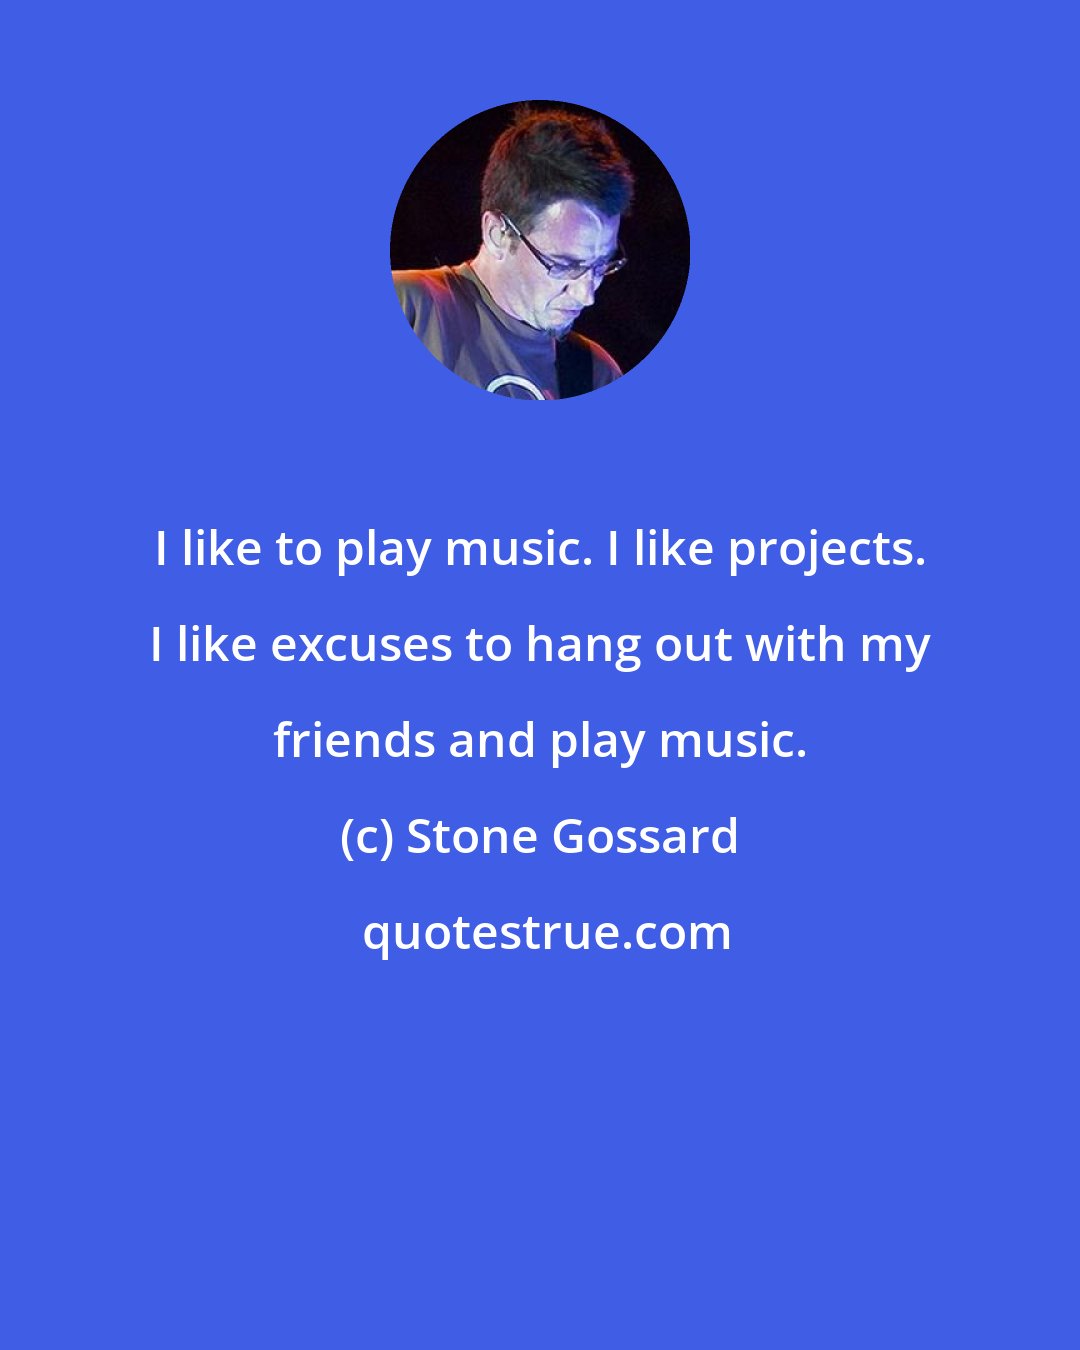 Stone Gossard: I like to play music. I like projects. I like excuses to hang out with my friends and play music.